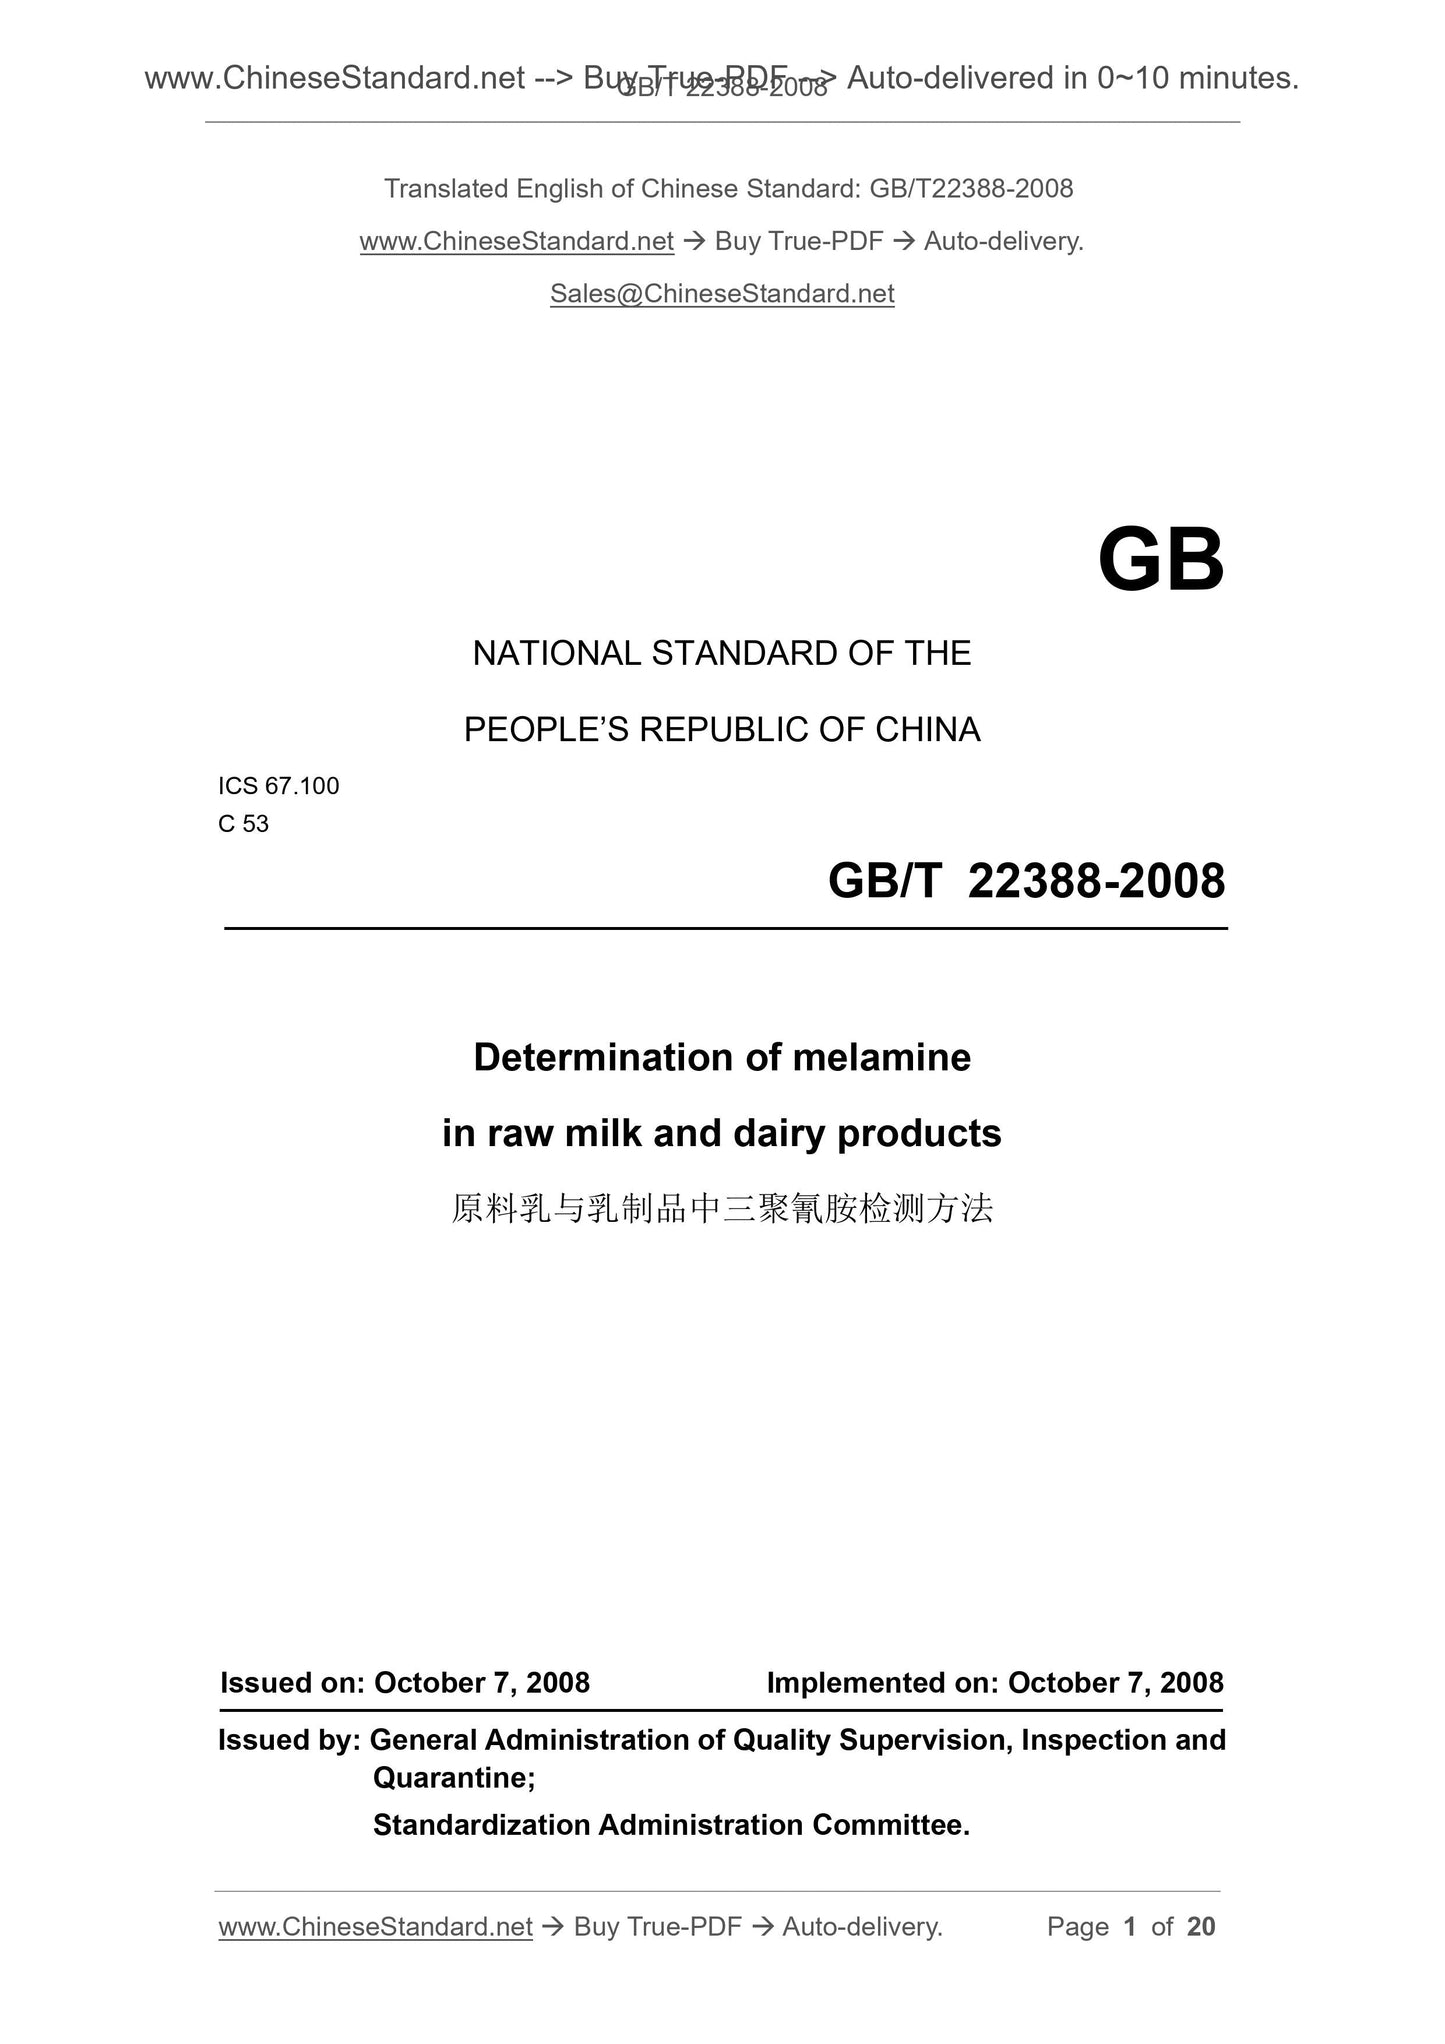 GB/T 22388-2008 Page 1